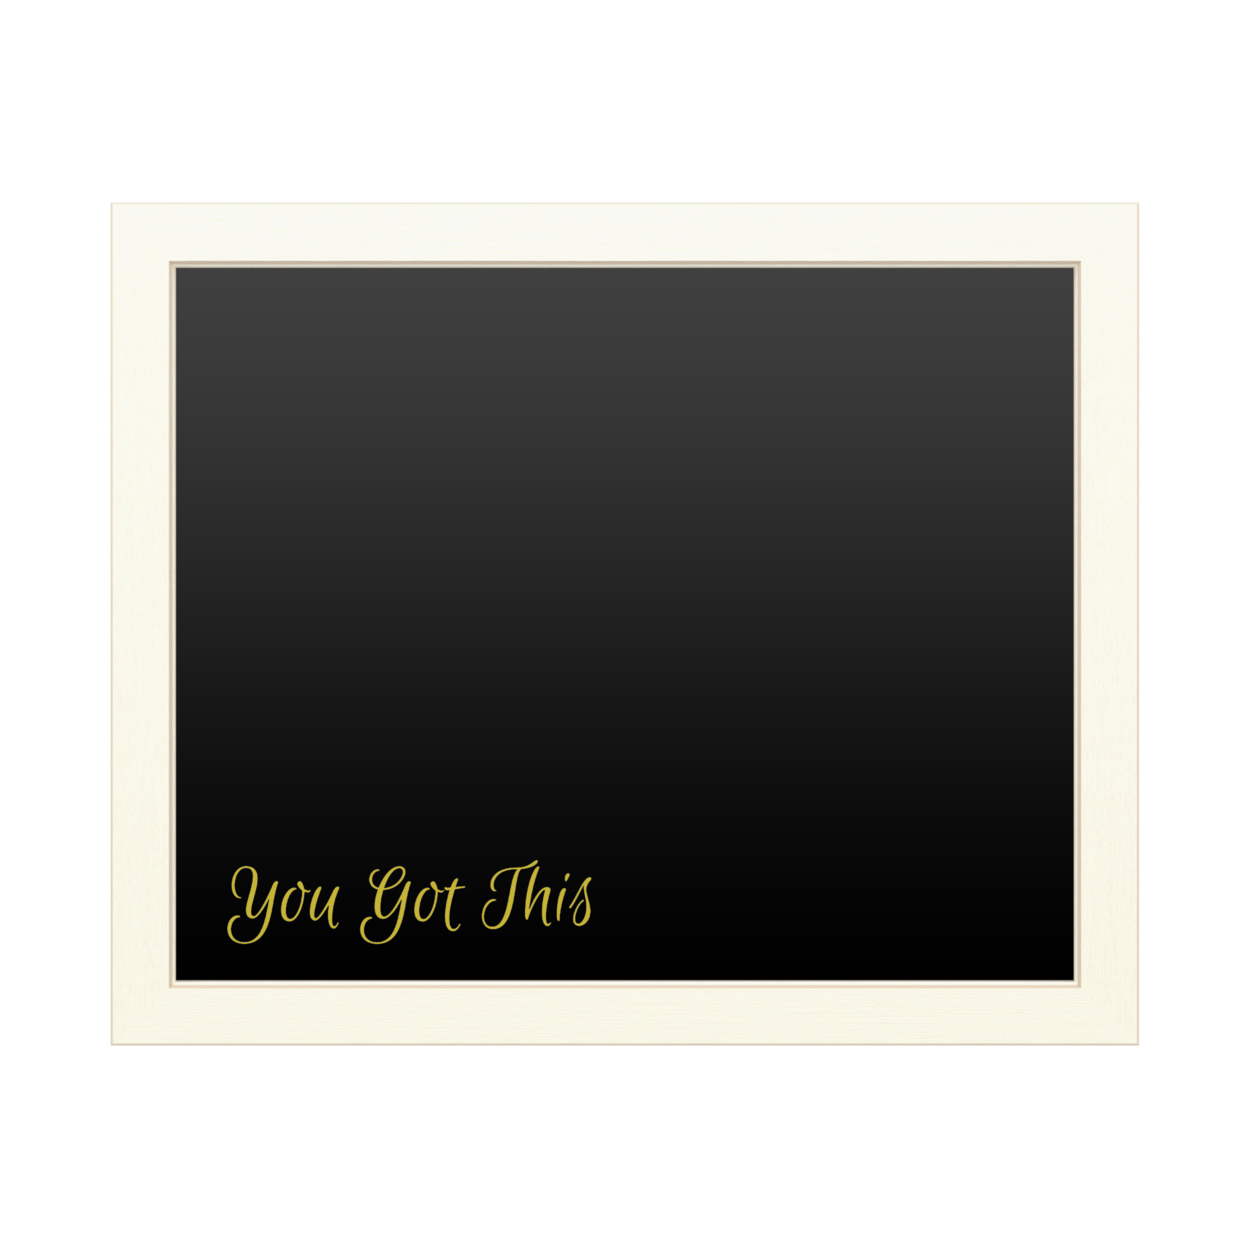 16 X 20 Chalk Board With Printed Artwork - You Got This 2 White Board - Ready To Hang Chalkboard